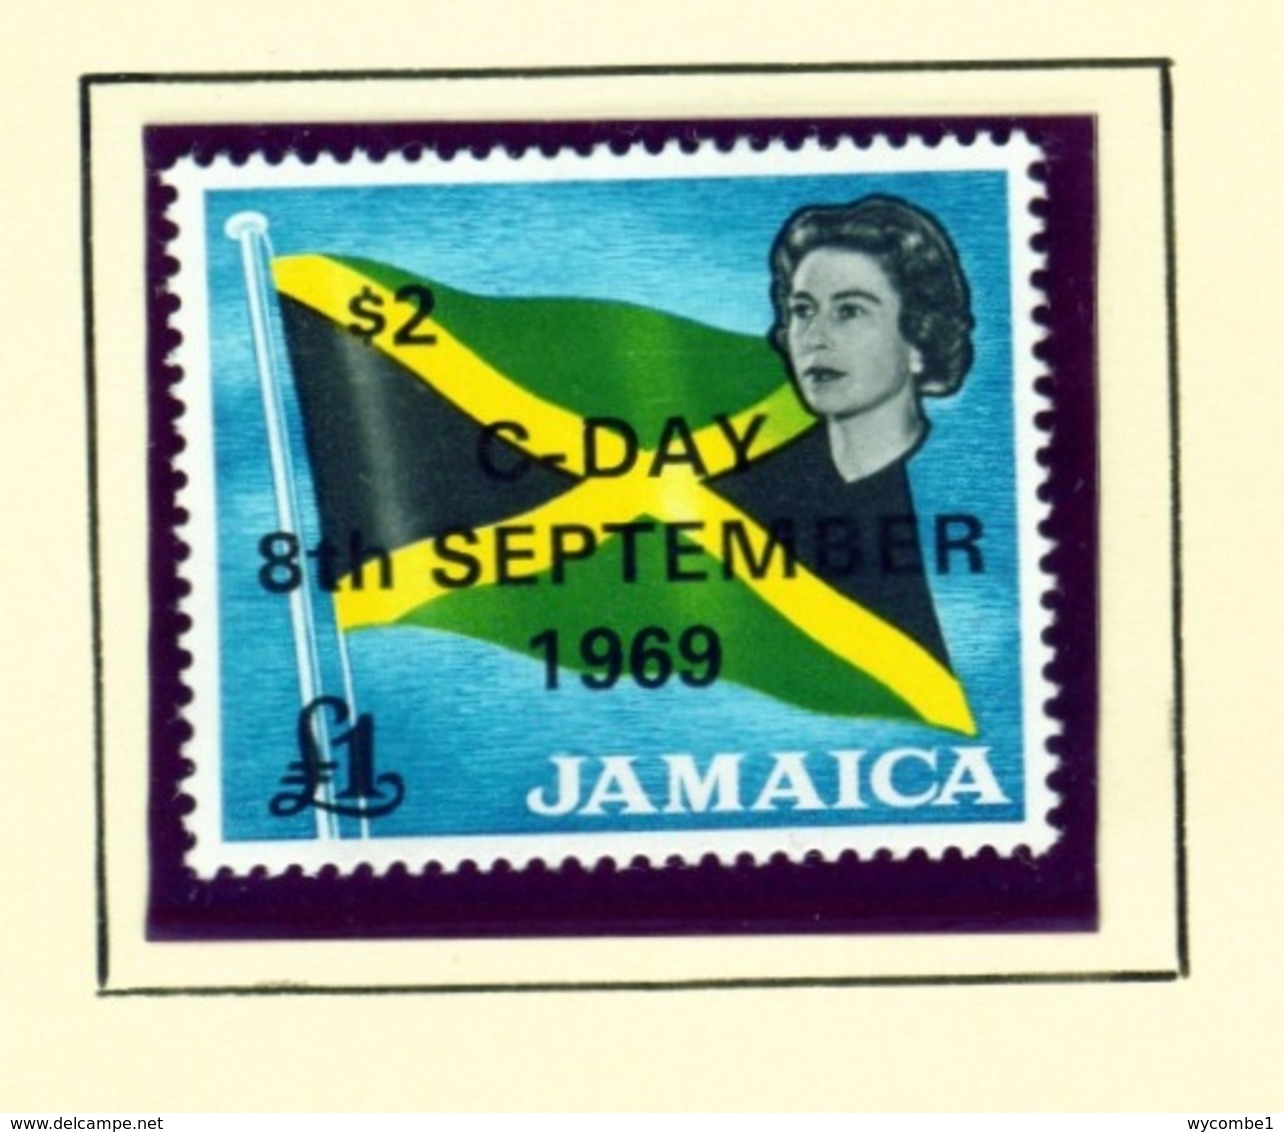 JAMAICA - 1969 Surcharge $2 0n £1 Unmounted/Never Hinged Mint - Jamaica (1962-...)